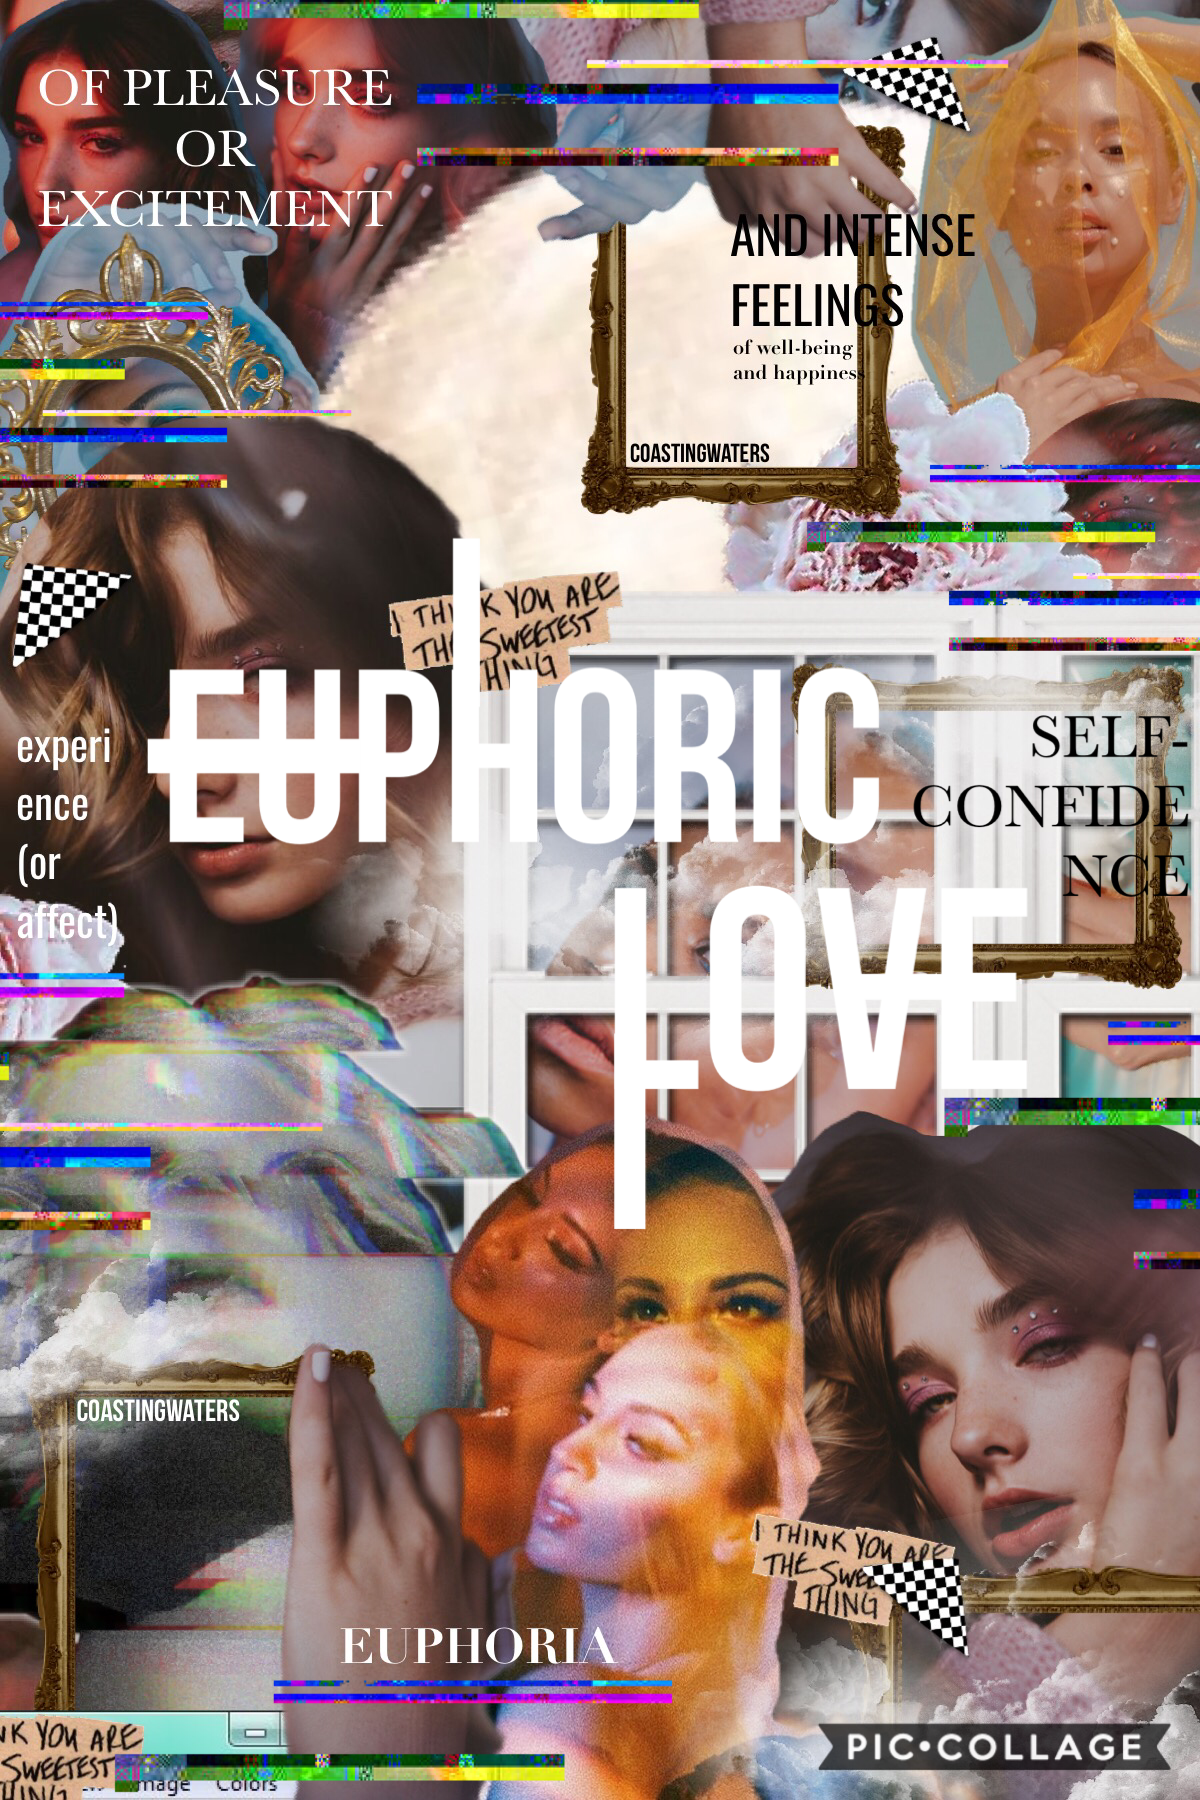 ⚜️13/1/21⚜️
HERE IT IS. THE BEST COLLAGE I’VE MADE. I wanted to try a new theme, so this is like a euphoria theme! Inspired by _serein_ and aestheticccc! Go follow them! QOTD: Have you watched Euphoria on Netflix? AOTD: No, but it sounds good!